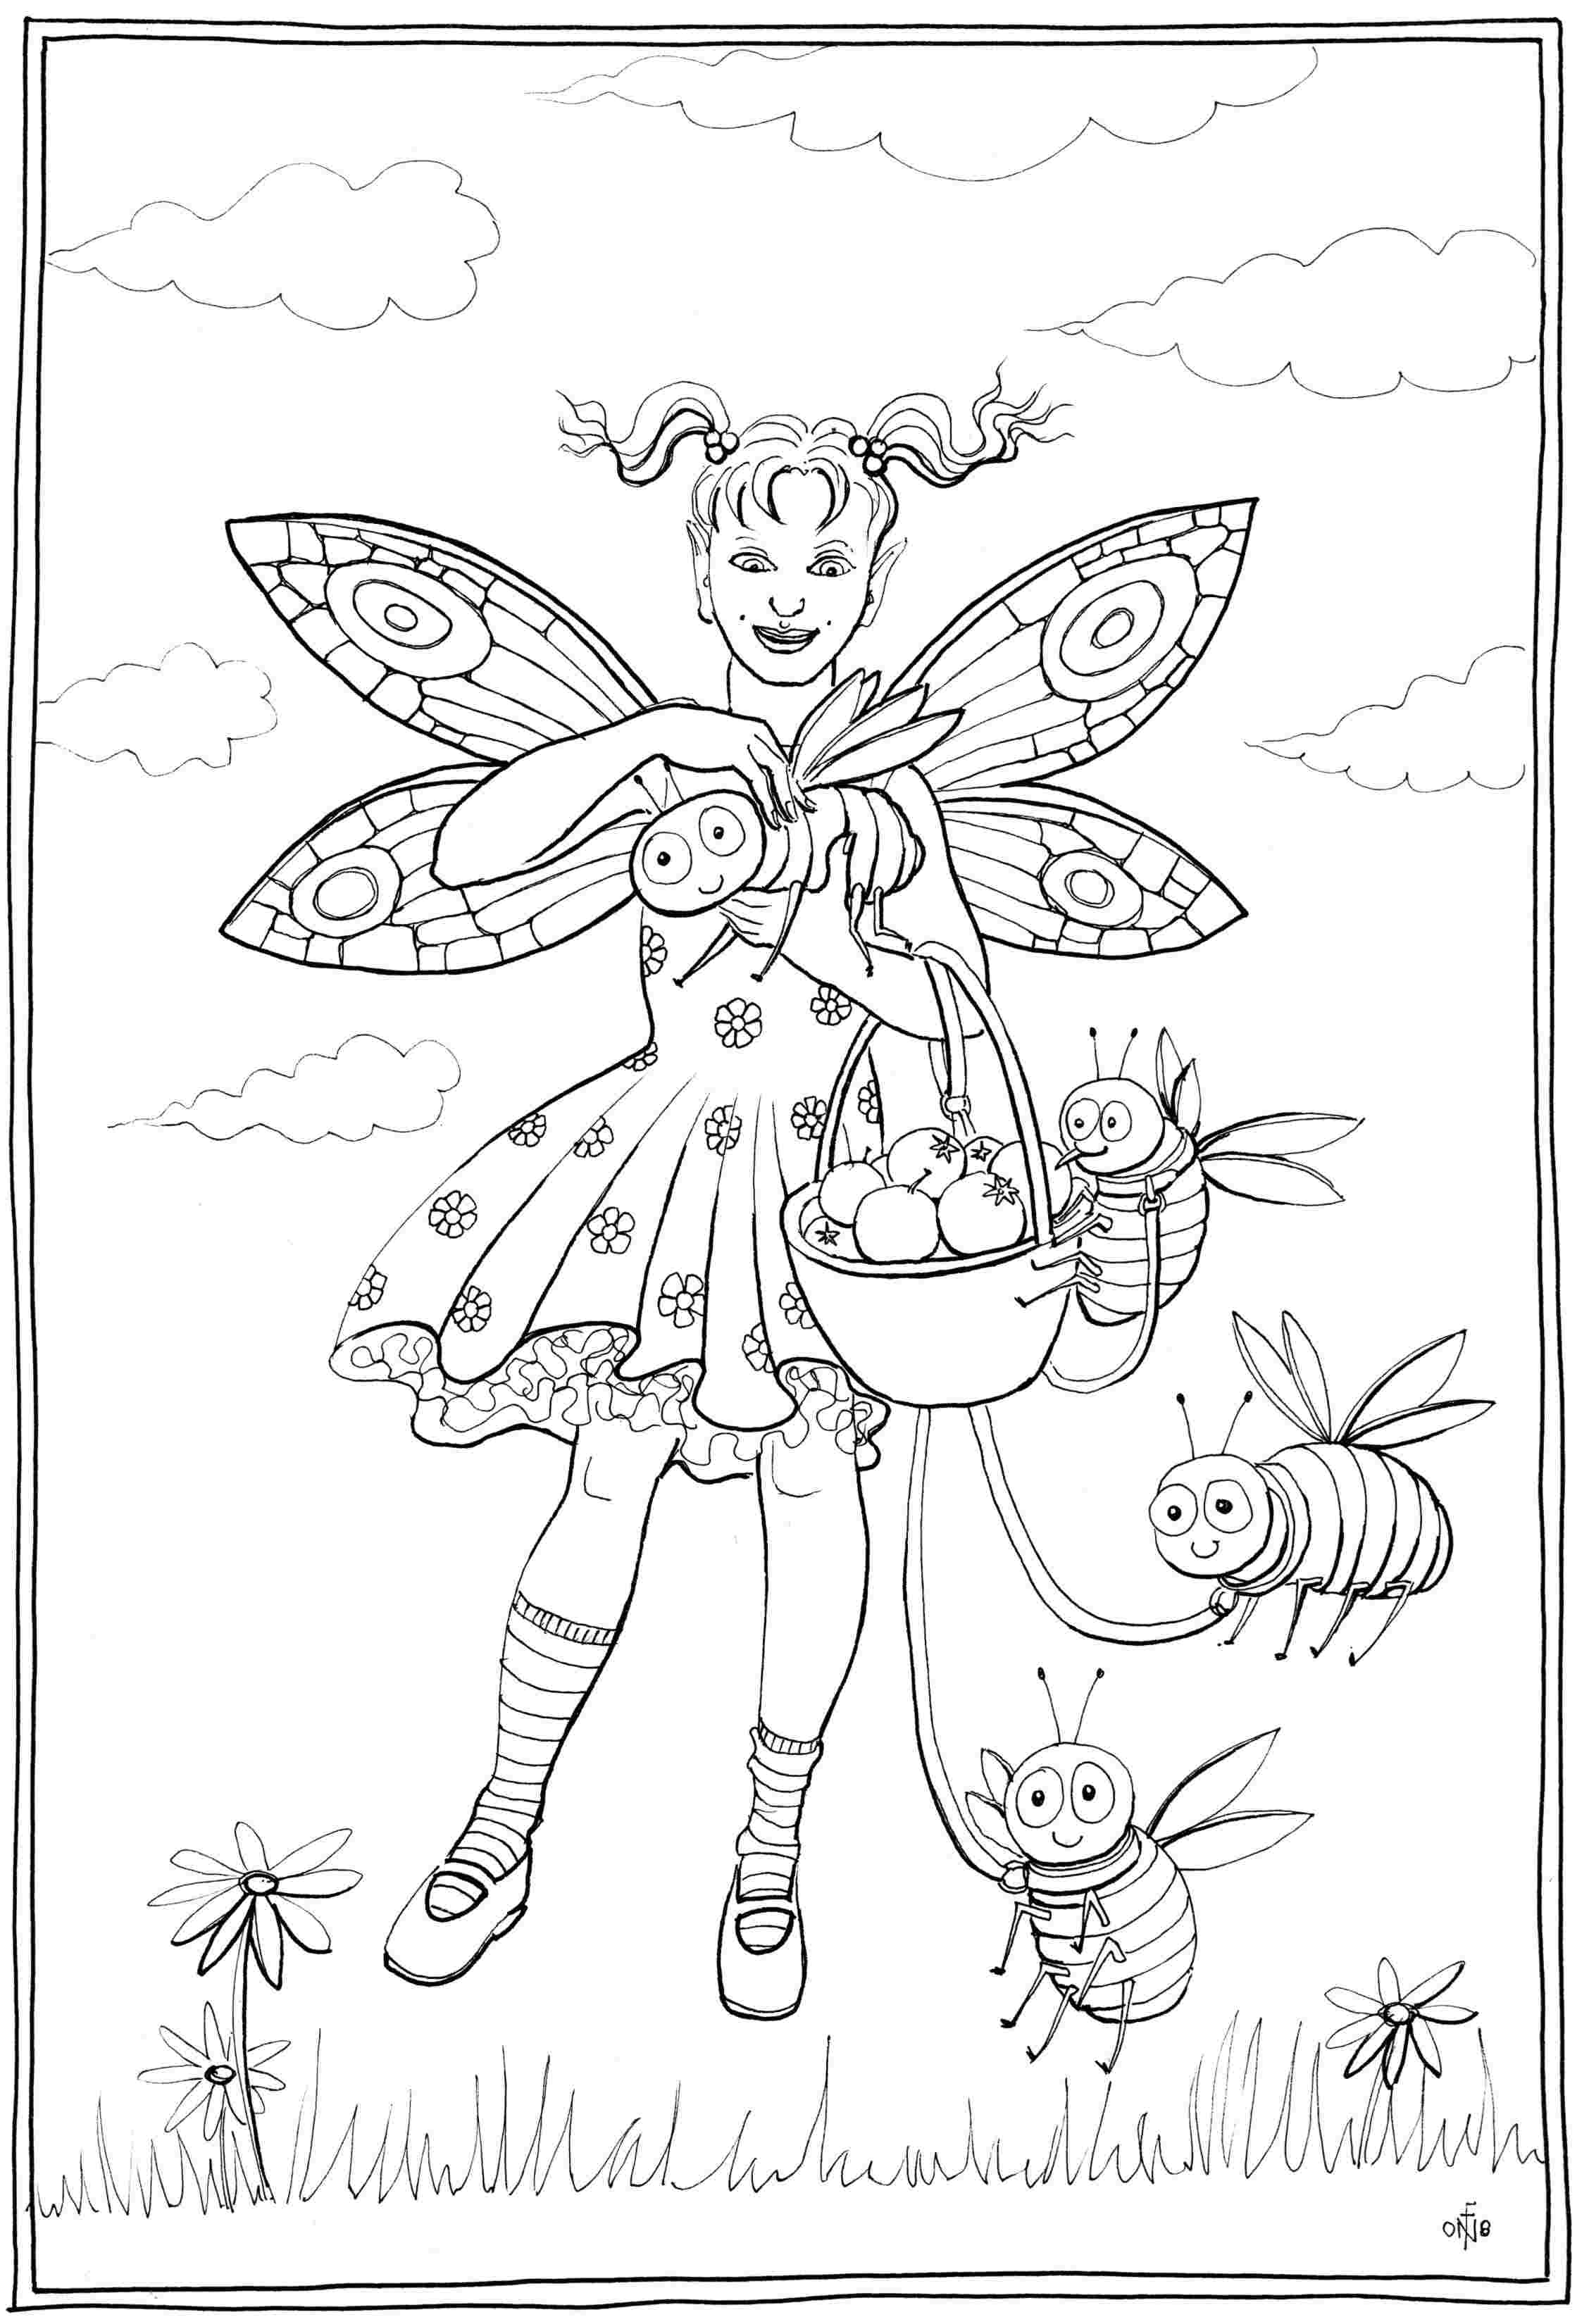 Pet Bees - colouring-in drawing - to download, right click and save, print out and colour in!